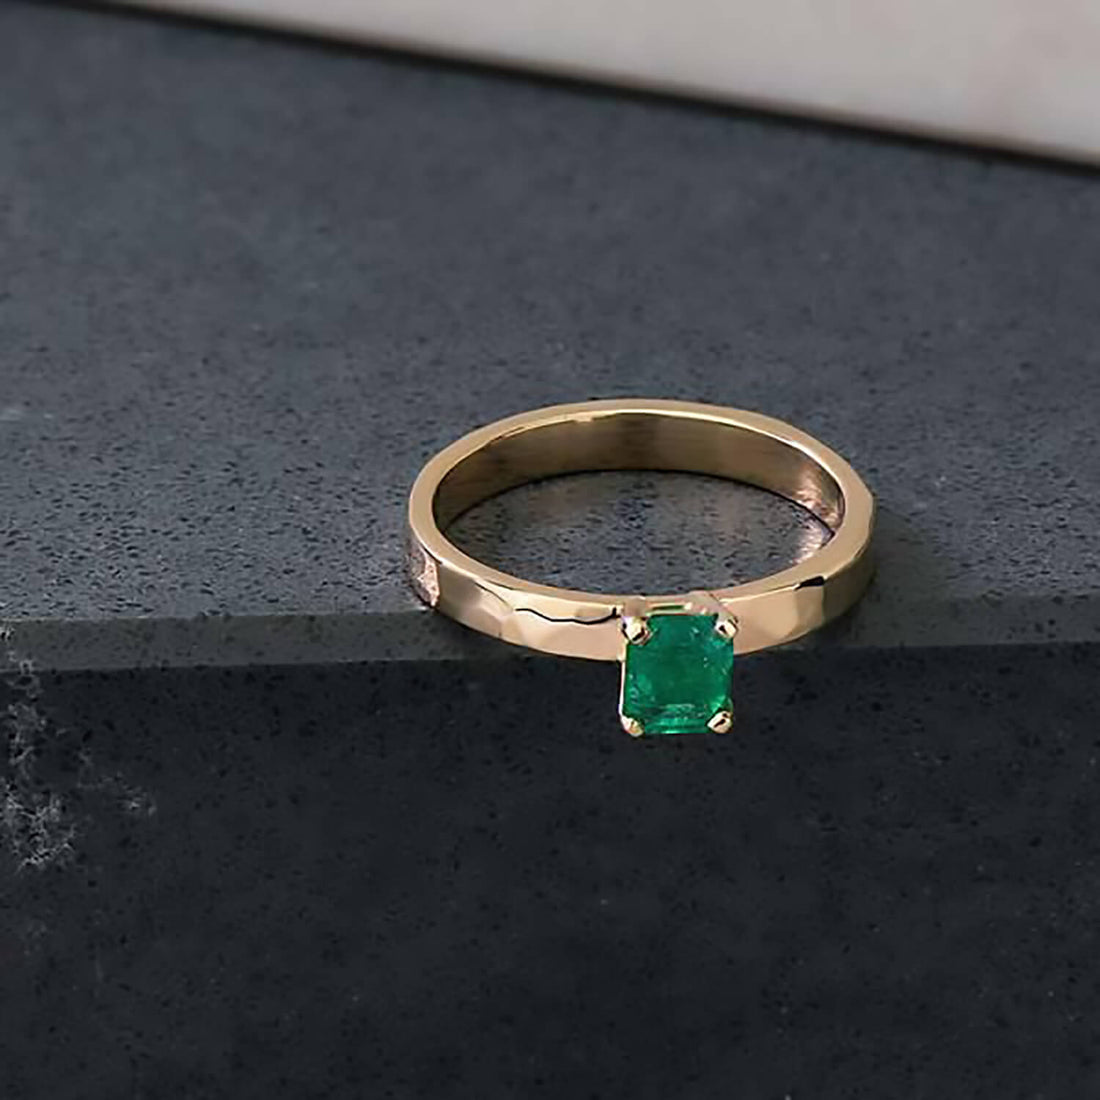 The Basics of Gold and Emerald Rings